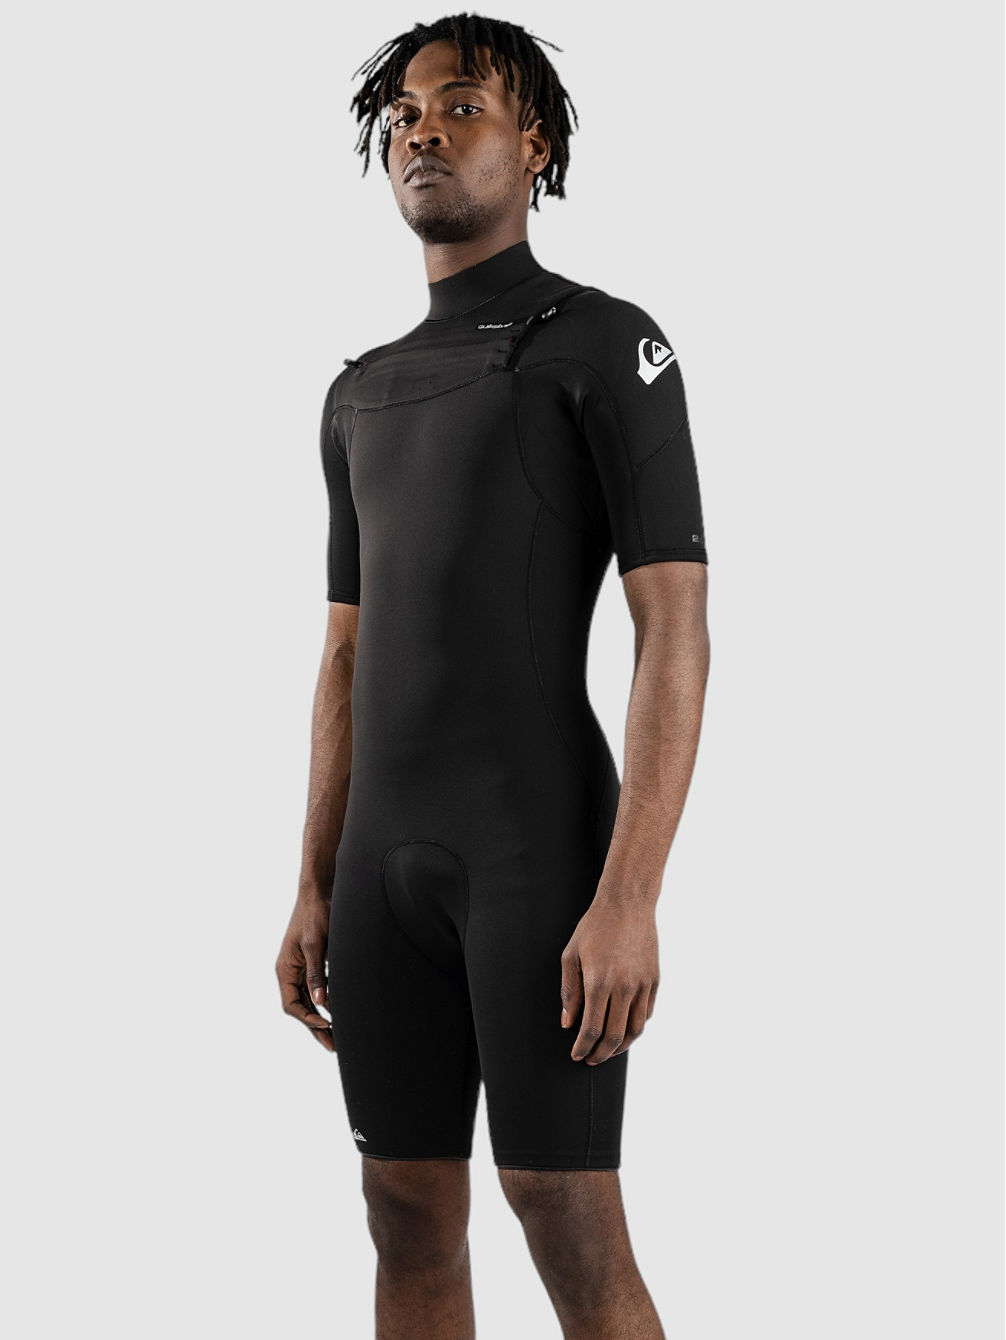 Everyday Sessions 2/2 Ss Sp Cz Wetsuit